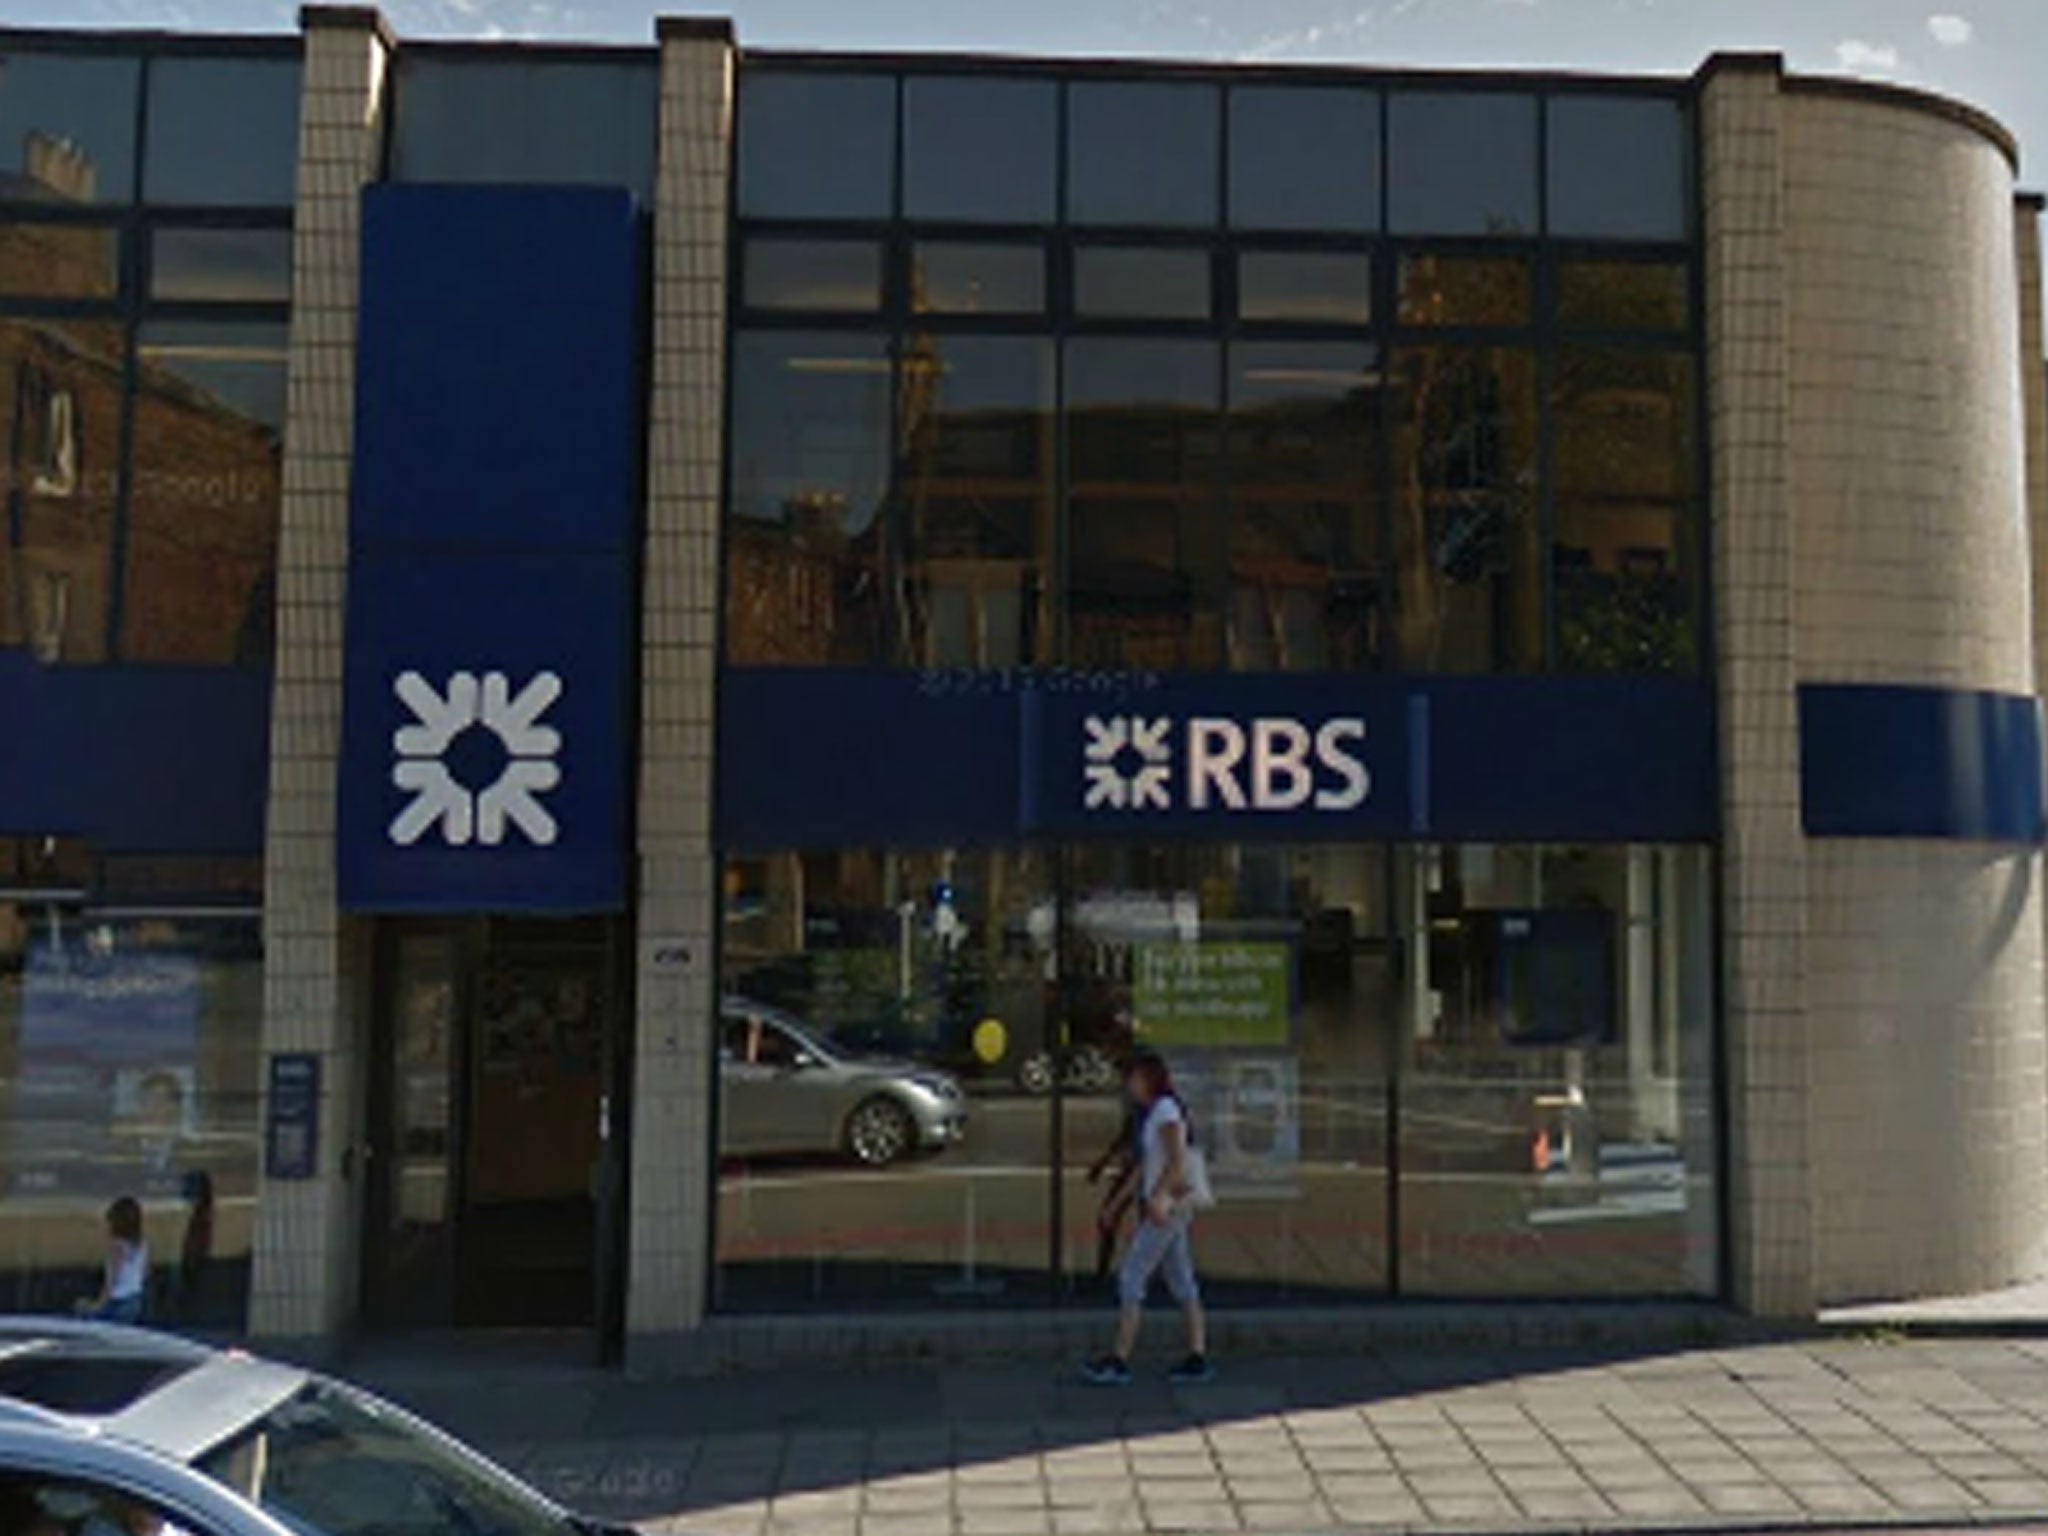 Royal Bank of Scotland in St John's Road, Edinburgh, where a man alleged stole thousands of pounds and got away in a taxi waiting outside